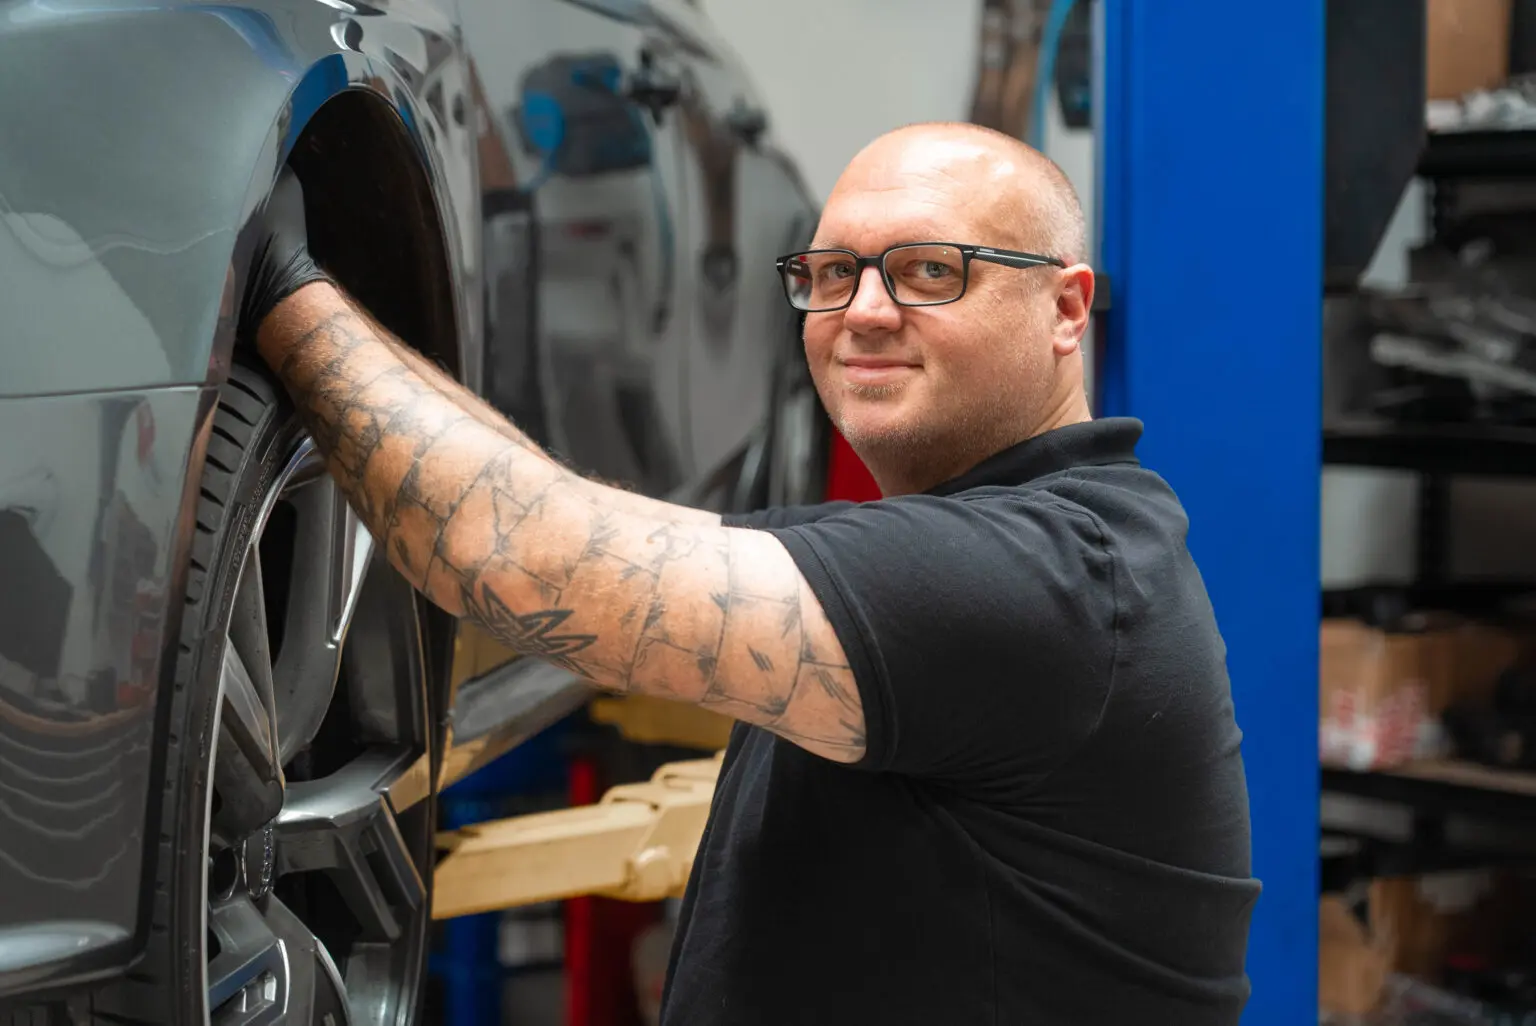 Meet the mechanic driving his business to new levels of success